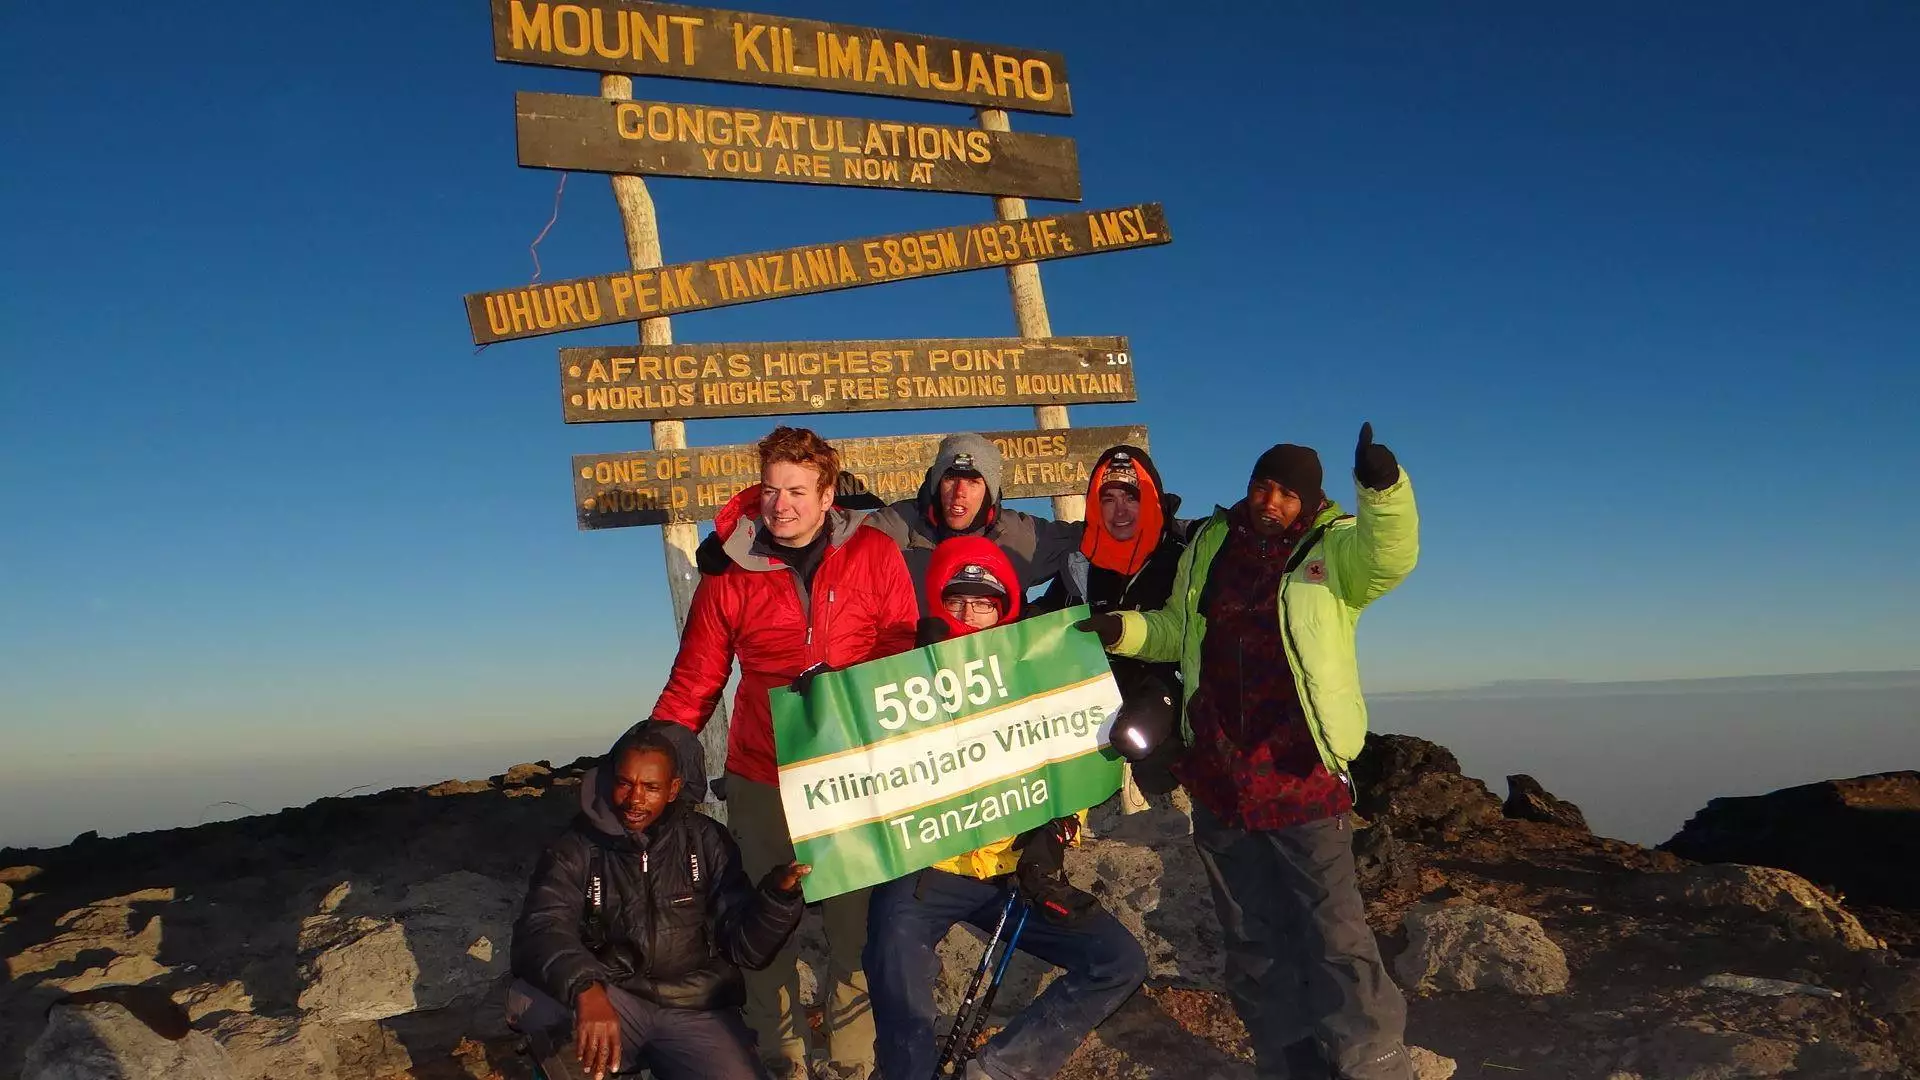 Get in touch with the team at Kilimanjaro Vikings